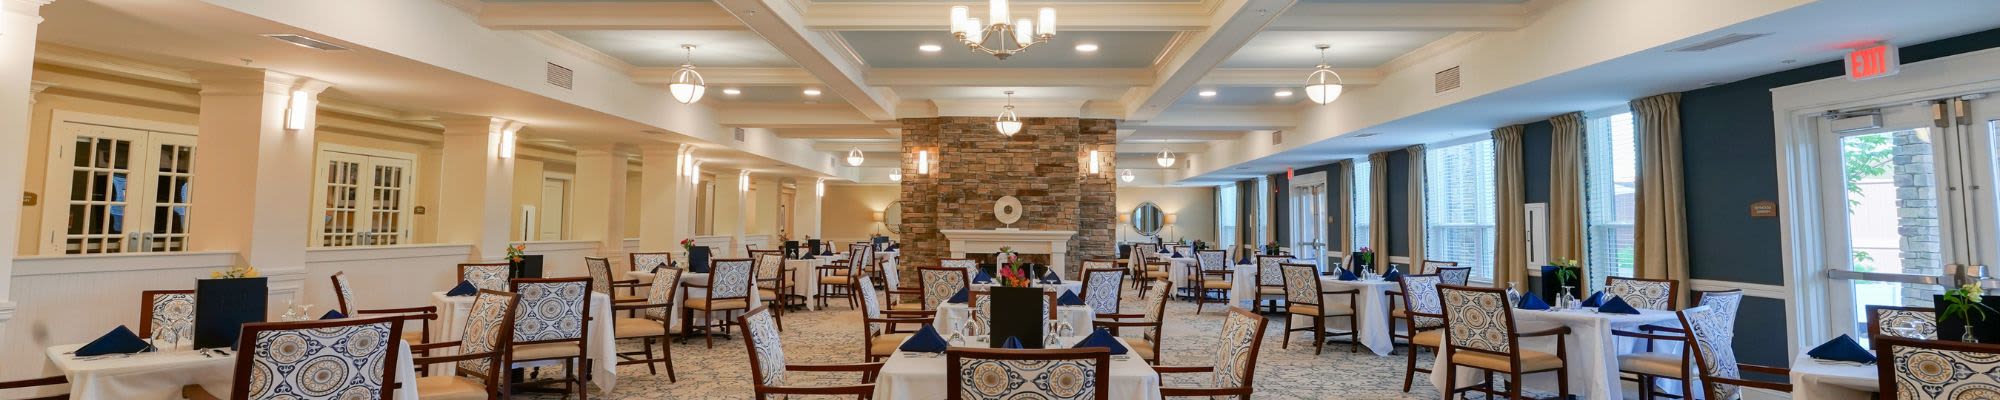 Dining at Harmony at Brentwood in Brentwood, Tennessee